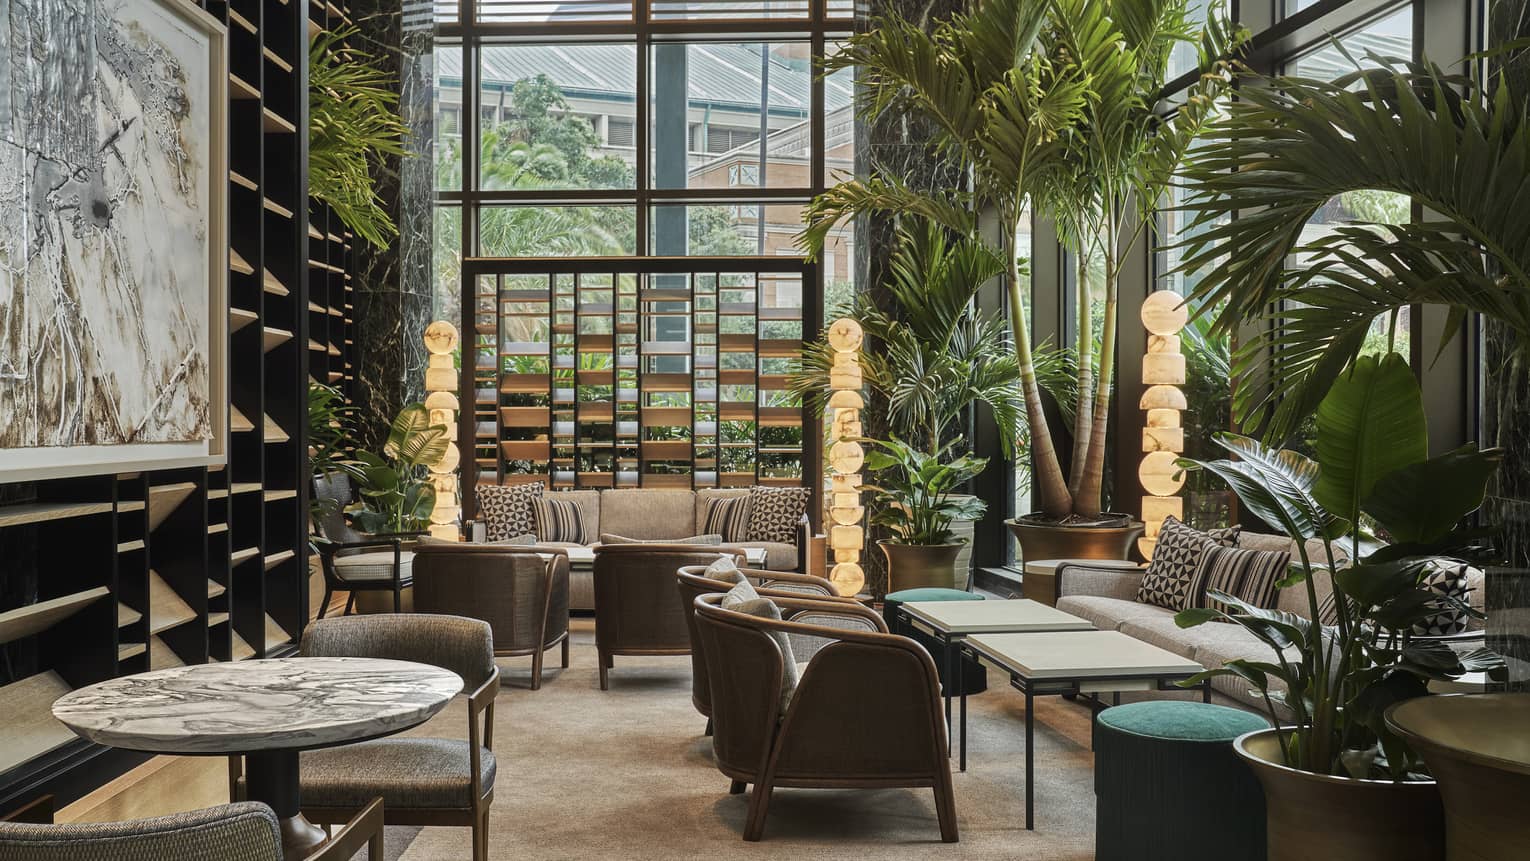 Chandelier Bar seating area with brown accent chairs, marble-topped tables, floor-to-ceiling windows and potted palms